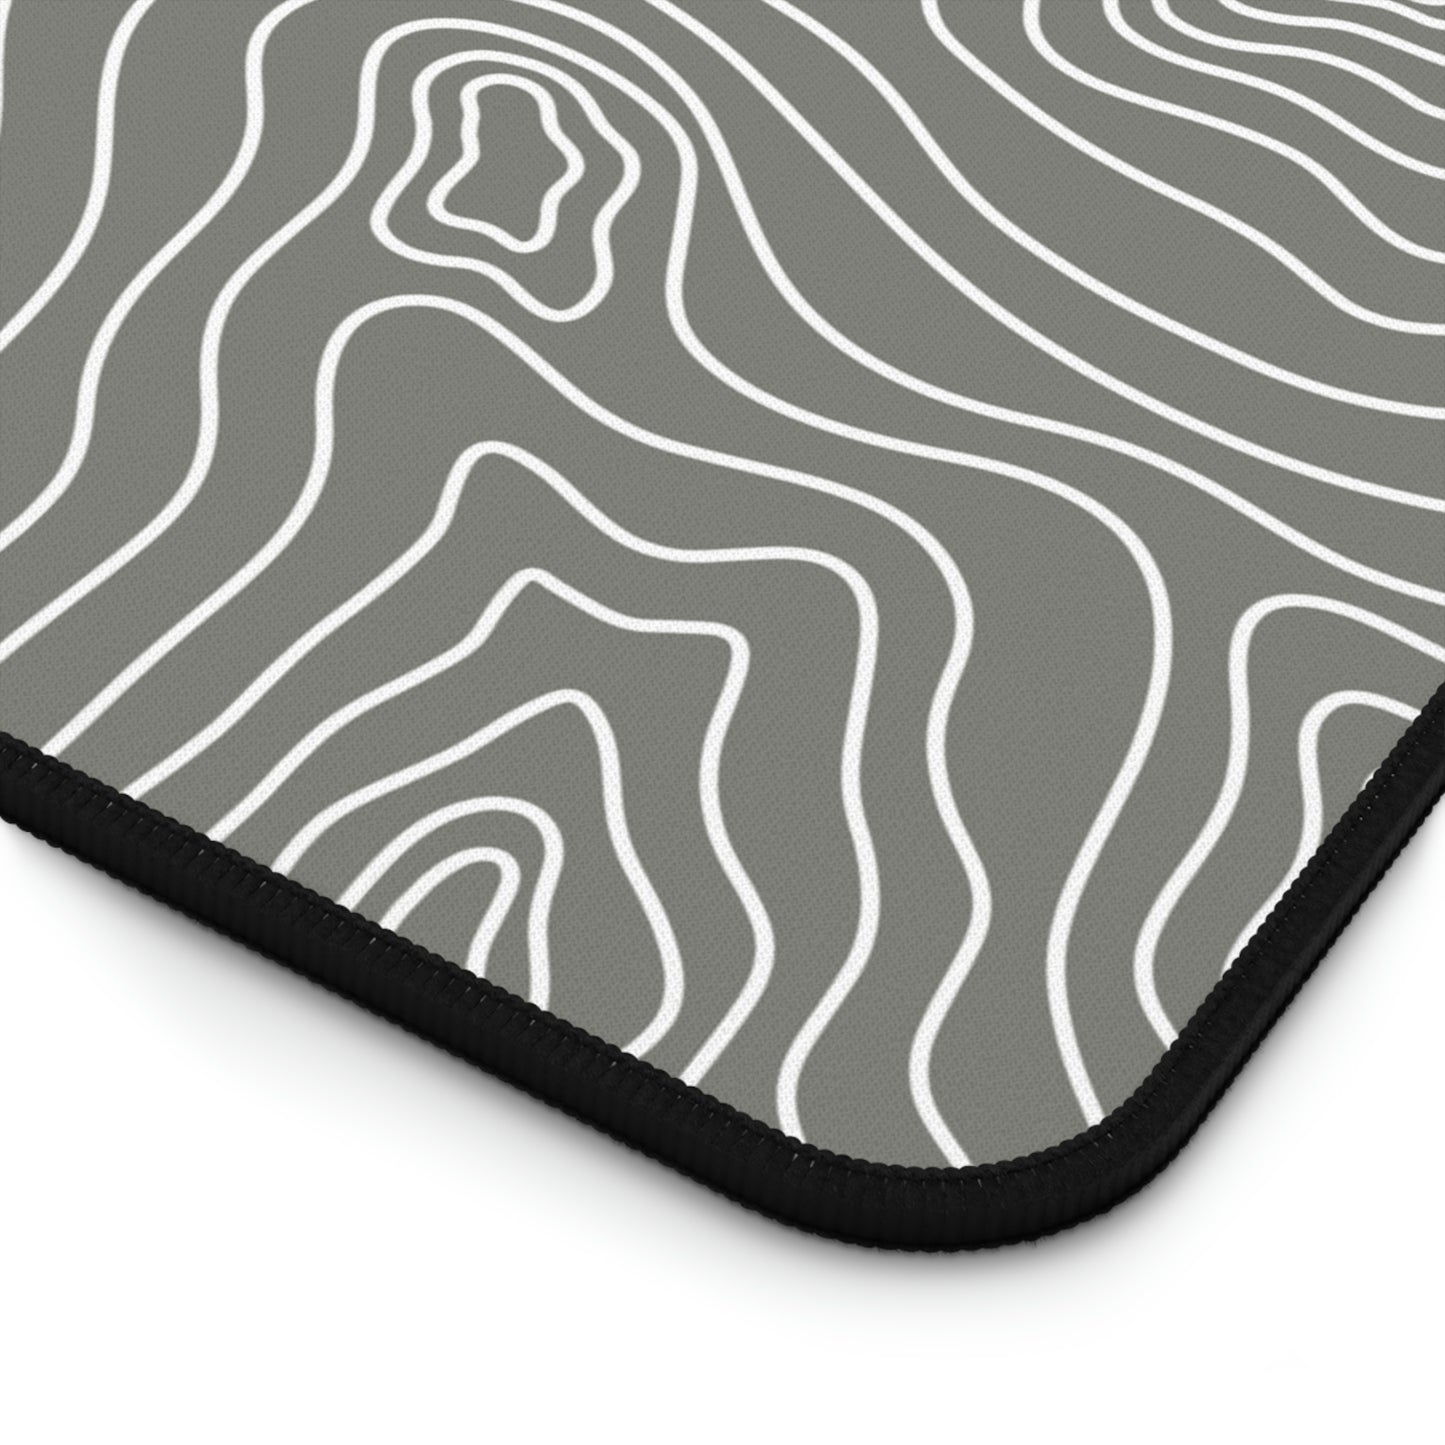 The bottom right corner of a 12" x 18" gray desk mat with white topographic lines.